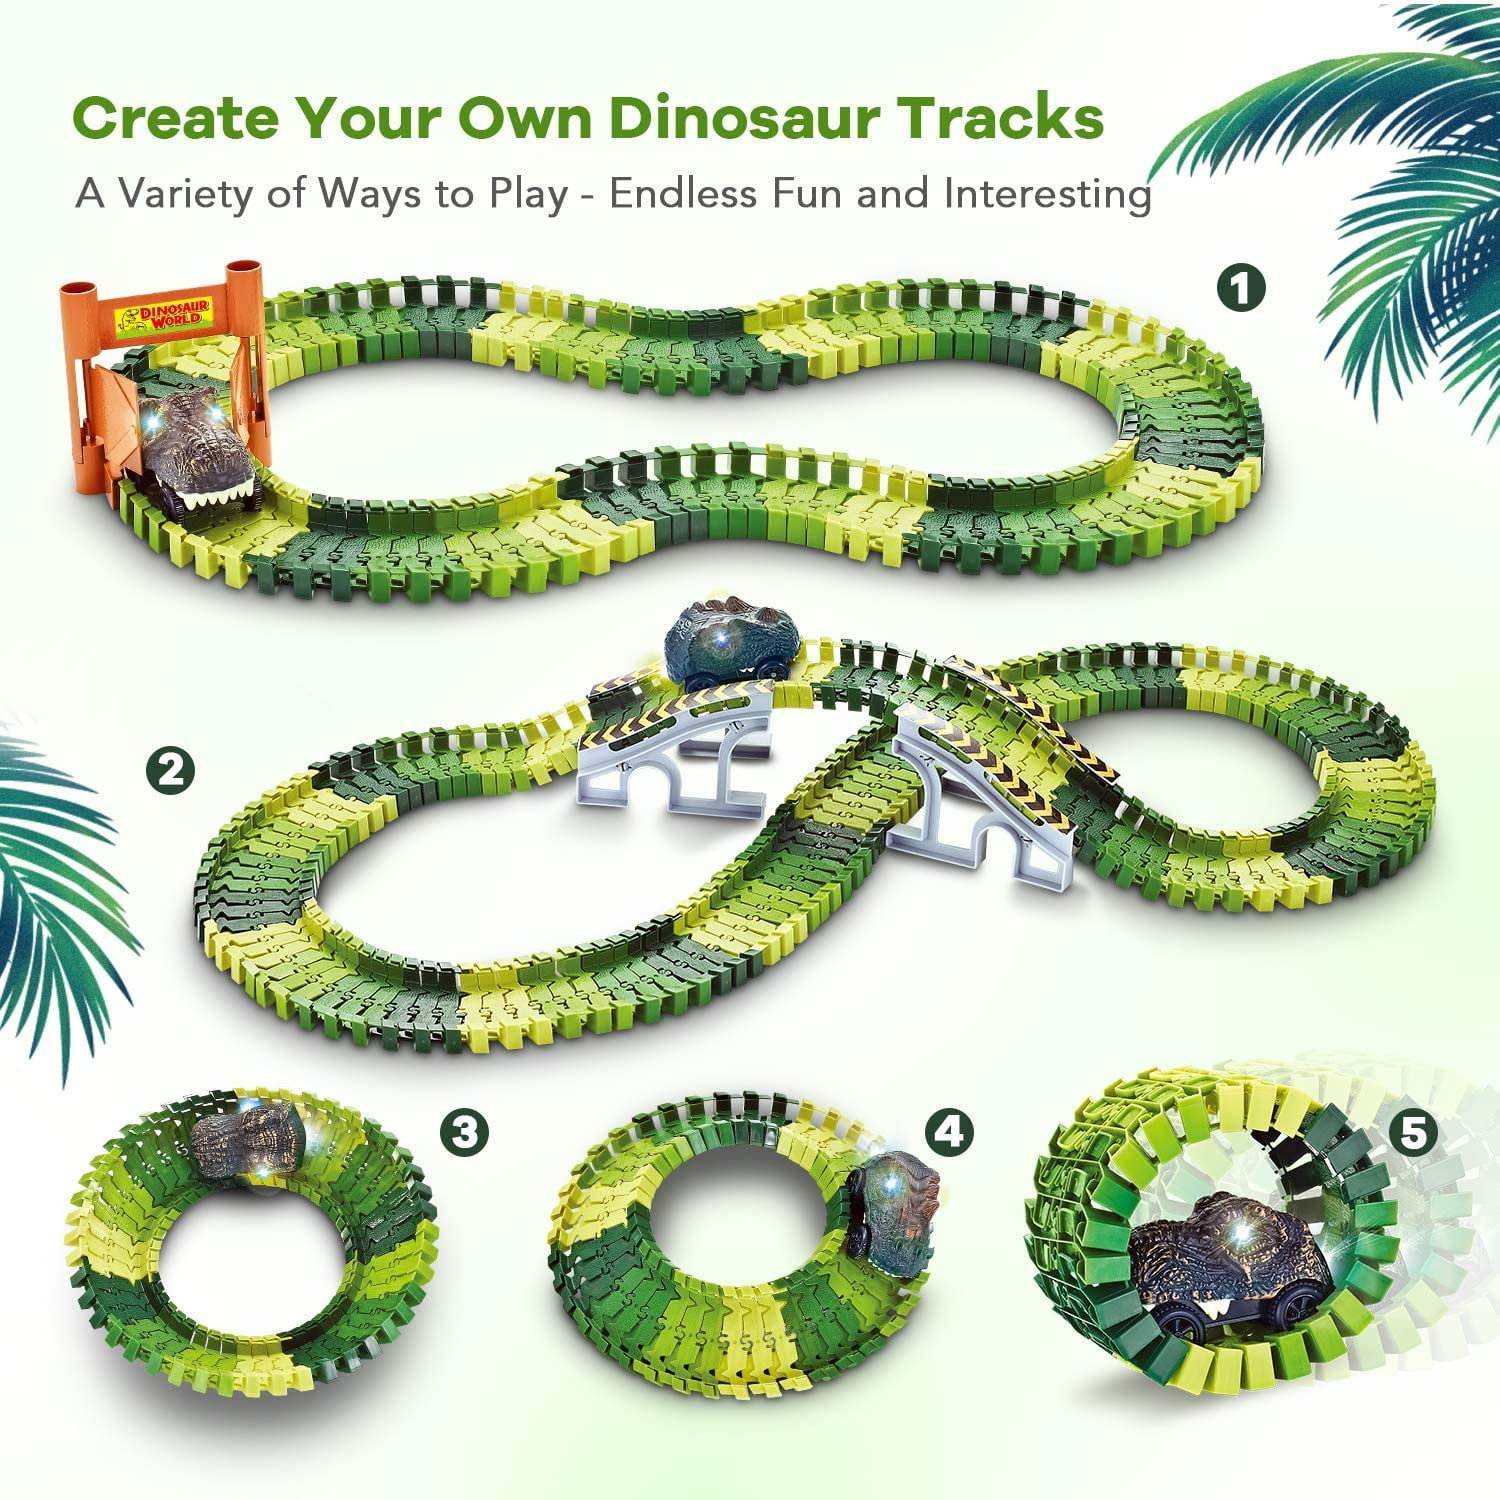 Flexible Race Track Road Playset Race Track Dinosaur World,Create a Road,Build Endless Possibilities Bridge,Slopes,142pcs,2 Dinosaurs Jurasic Experience for Boy and Girl Age 3+Toddlers Birthday gifts 